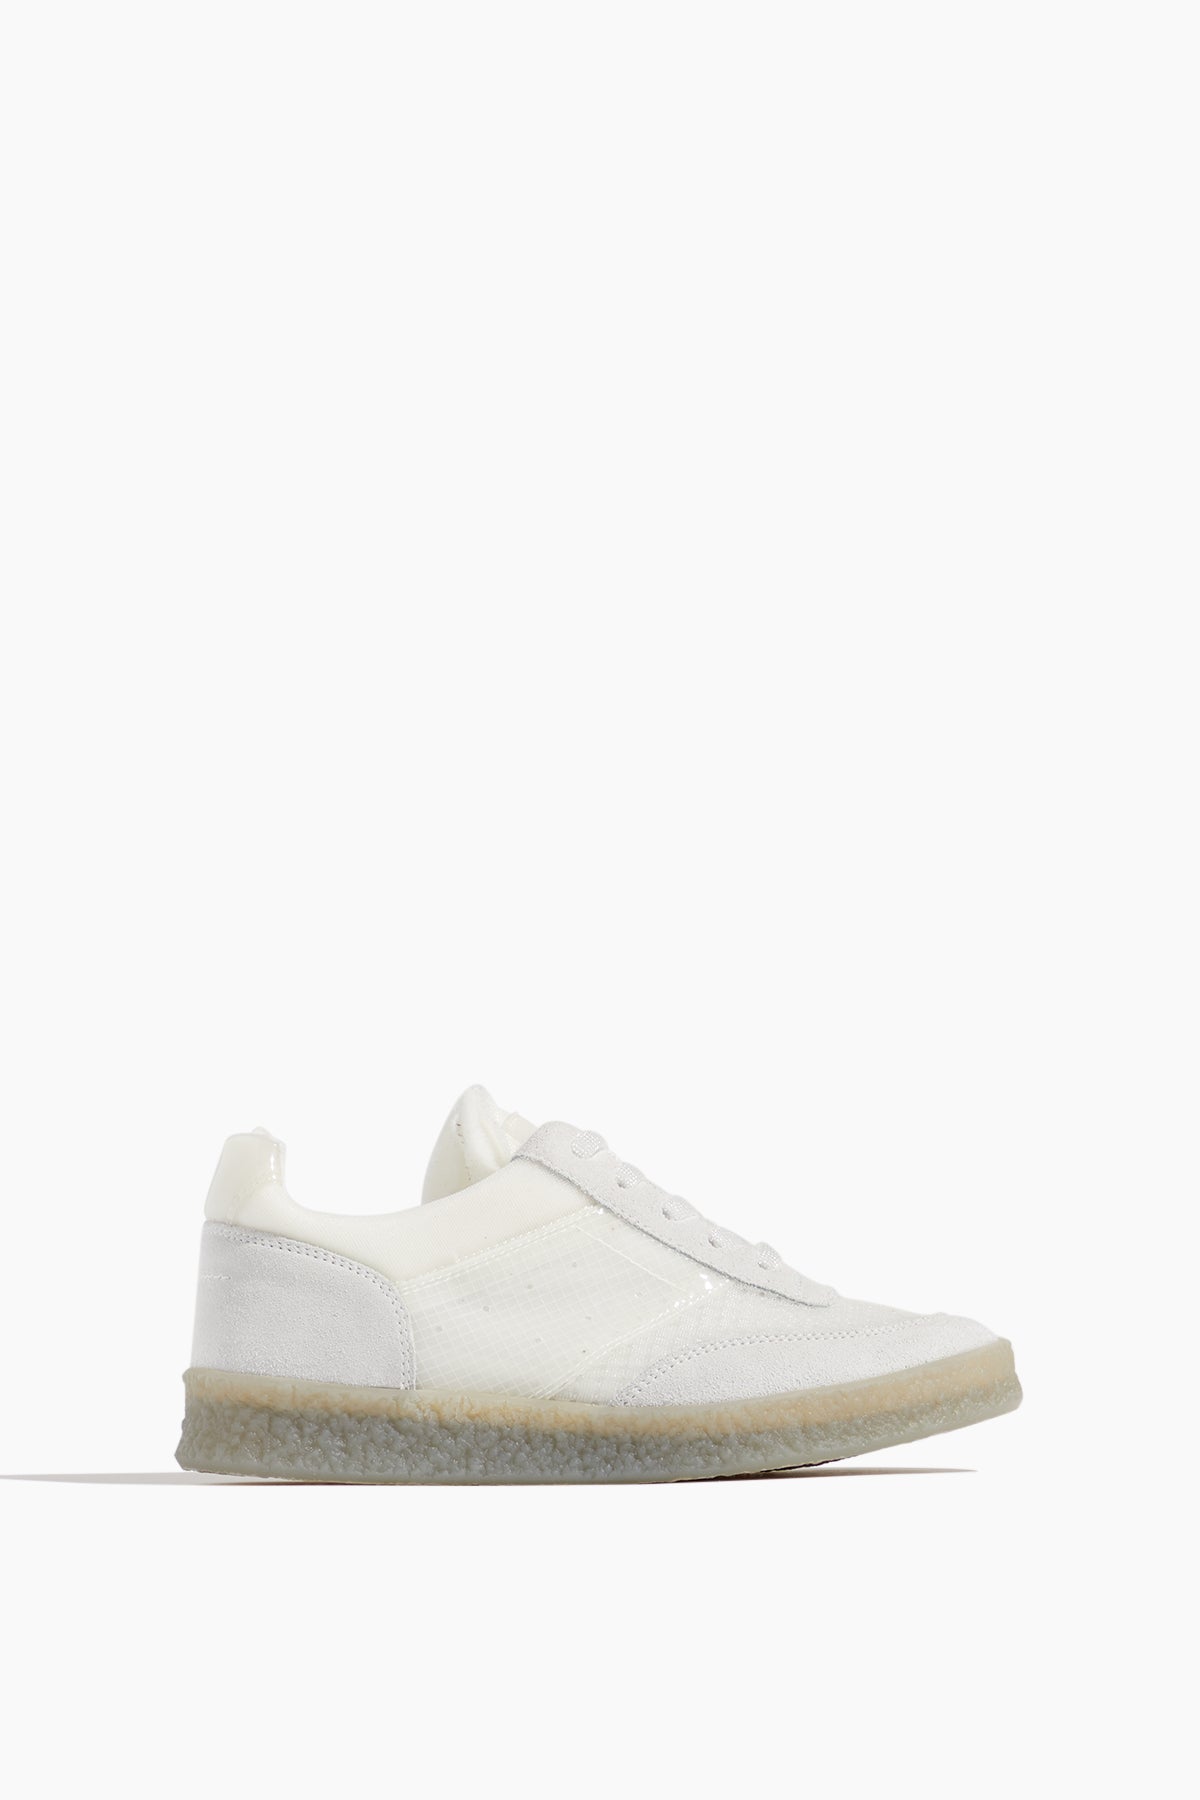 MM6 Maison Margiela Low Top Sneakers Court Sneakers in White Sand